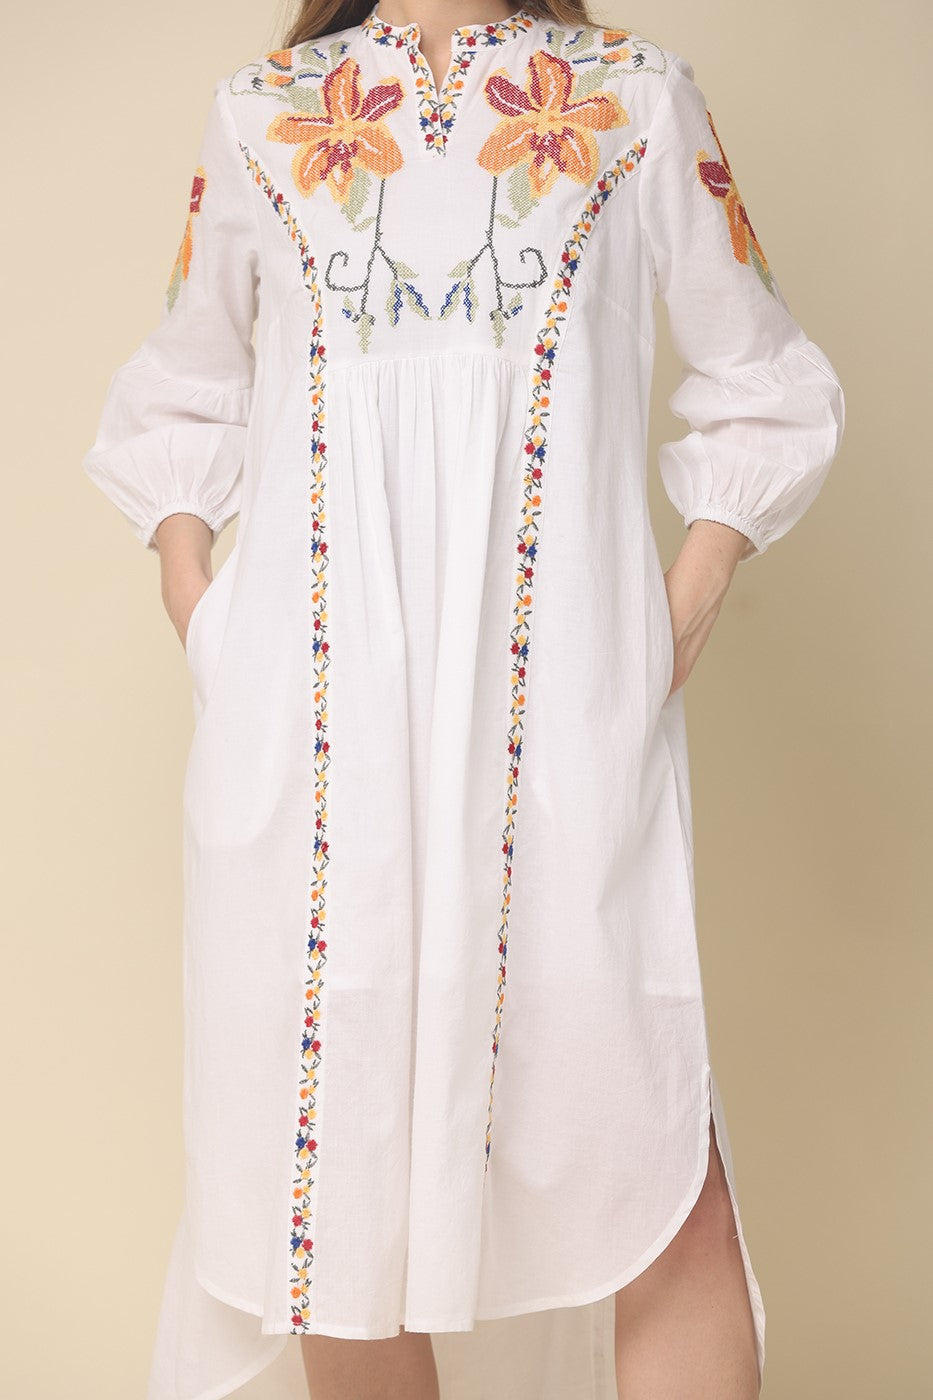 White Floral Embroidered Cotton Linen Dress